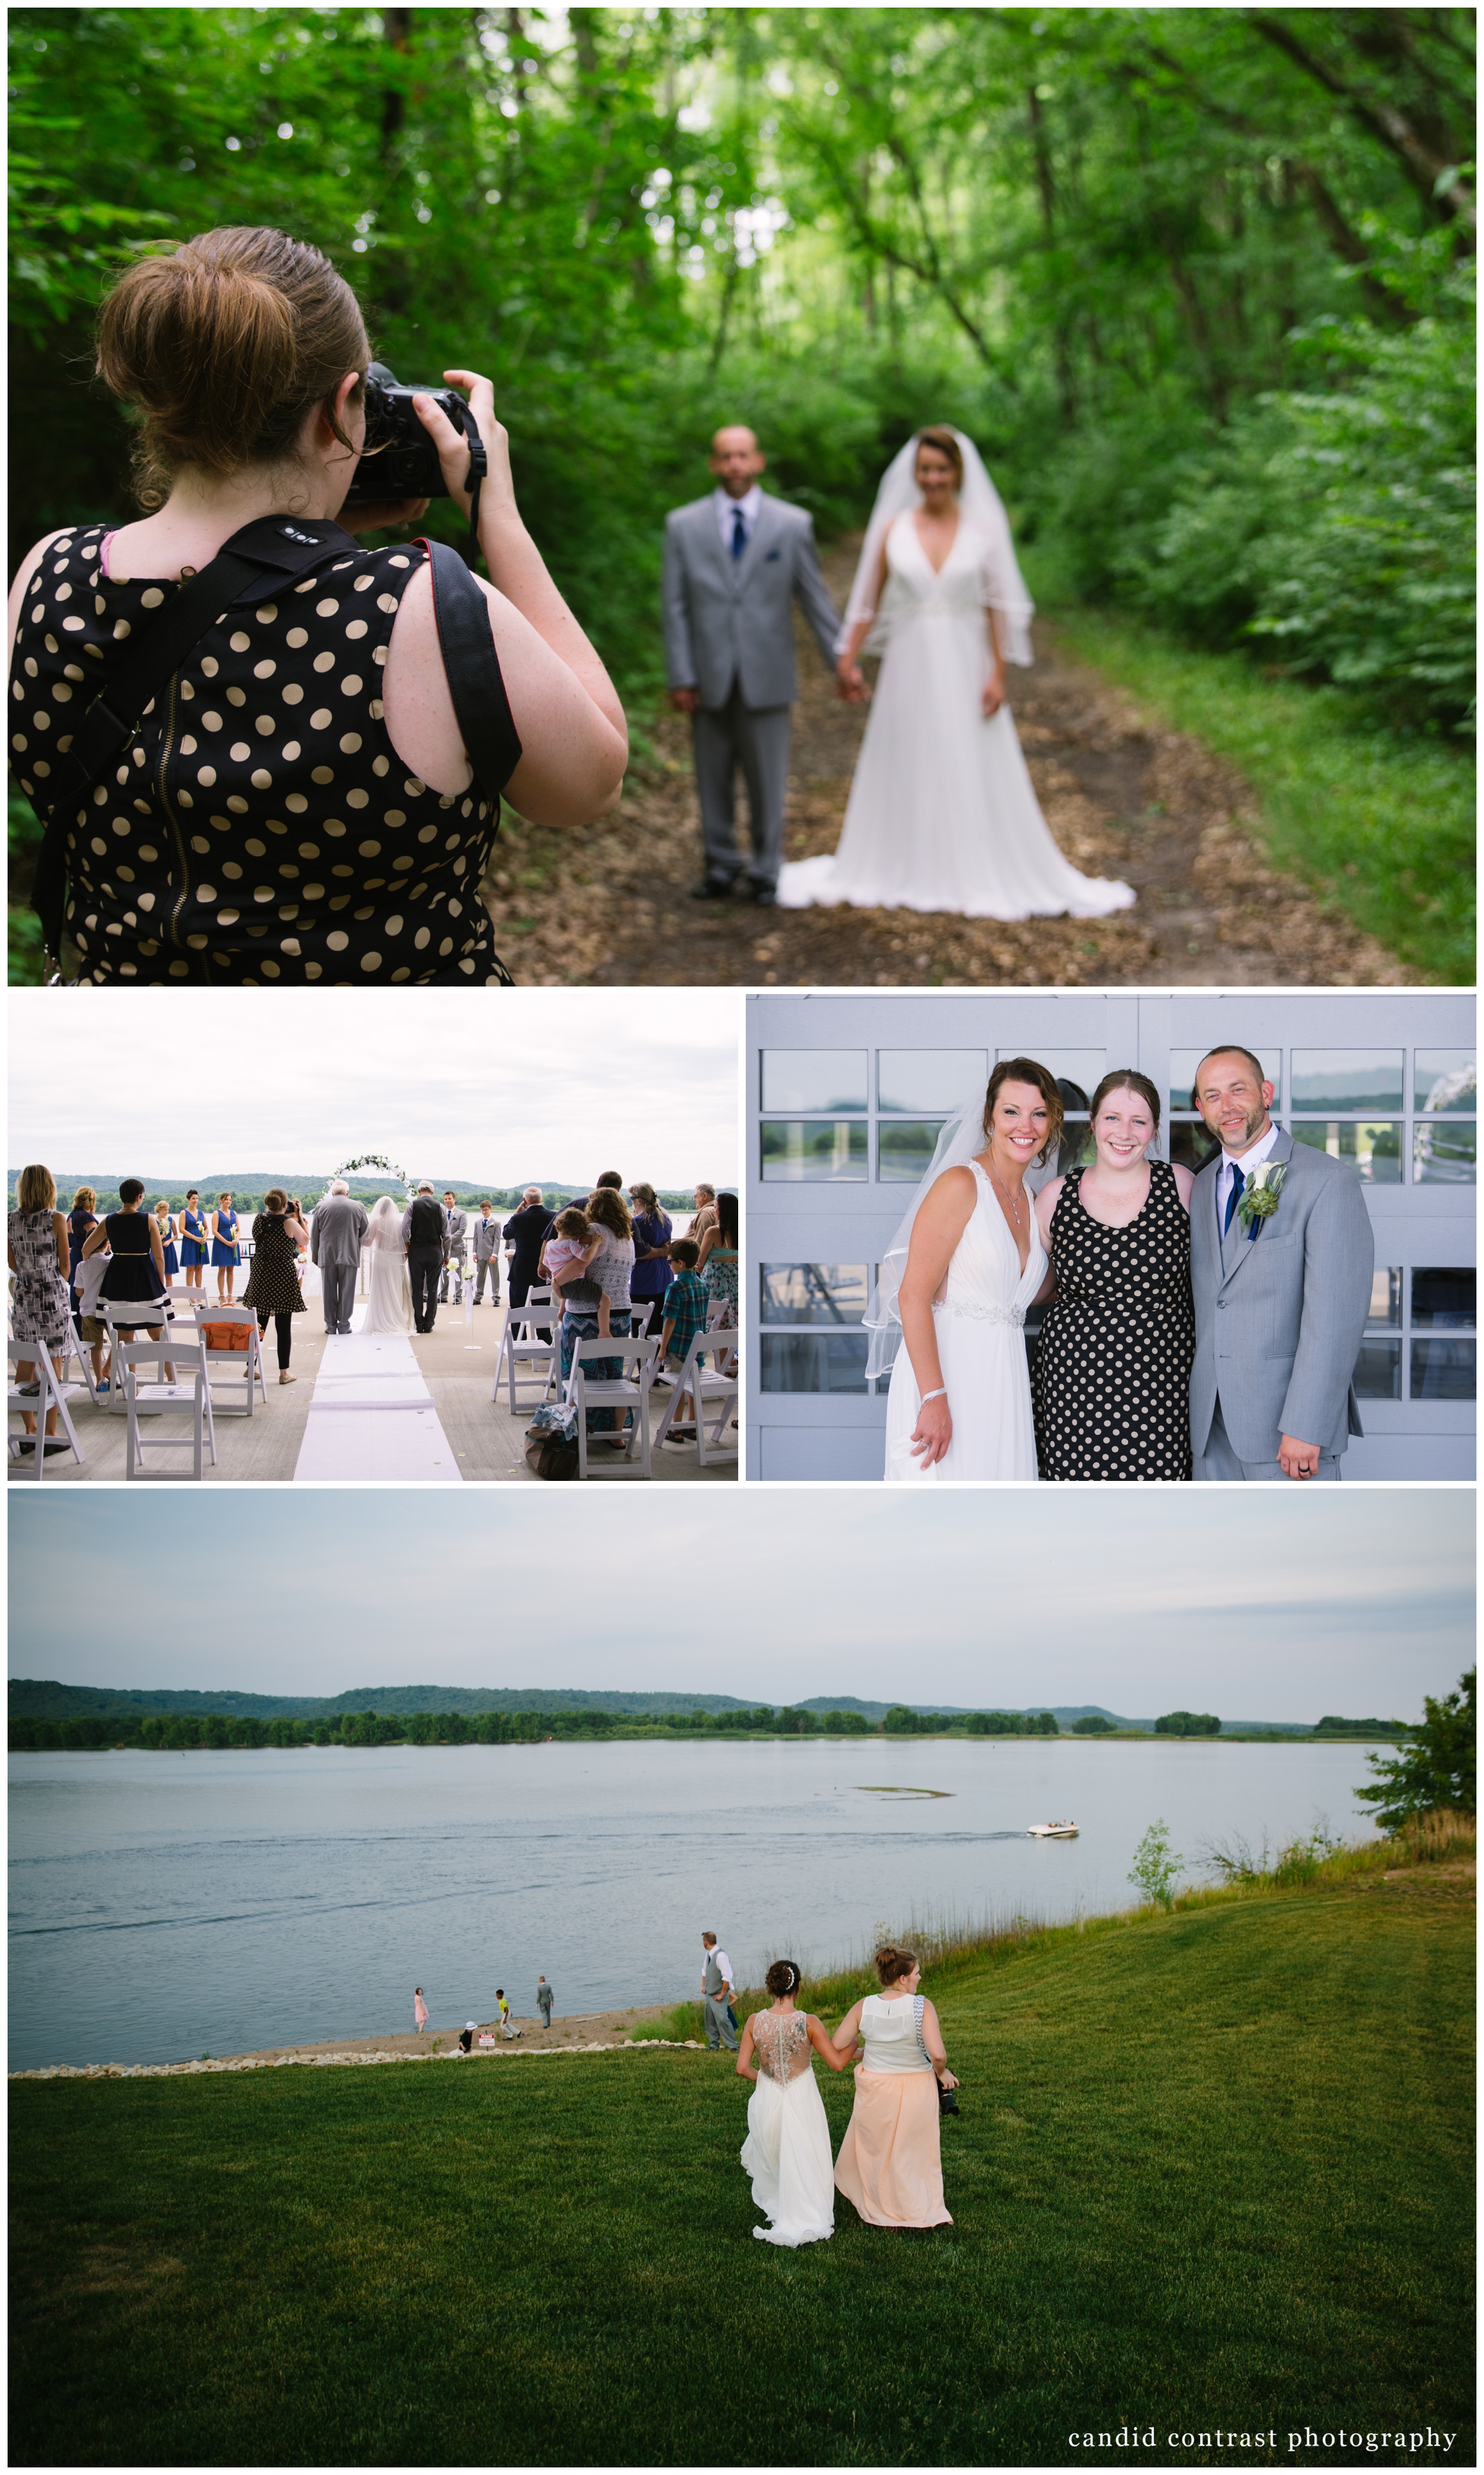 behind the scenes wedding photographer candid contrast photography